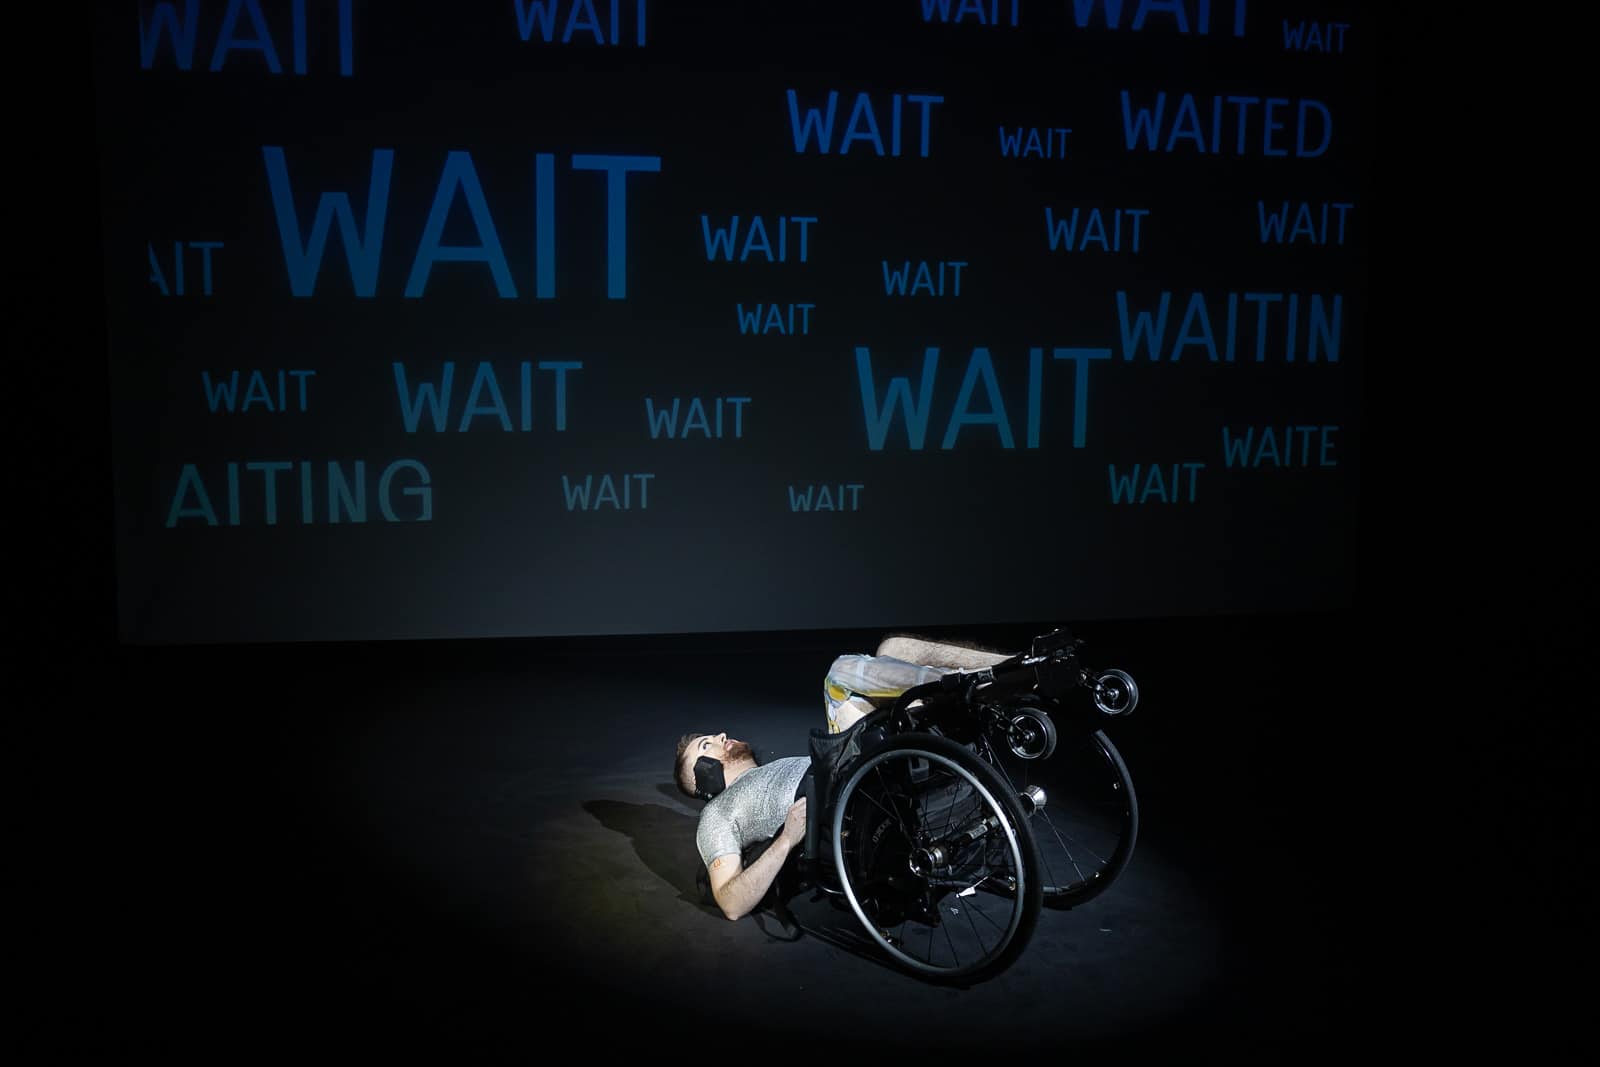 Jamie Hale performs NOT DYING. Jamie, white person with red hair is laid on the floor in their manual wheelchair. The are wearing a silver shirt, maroon boxers and their catheter bag is seen on their right leg. Behind them, the word 'WAIT' is projected repeatedly across the back wall of the theatre.